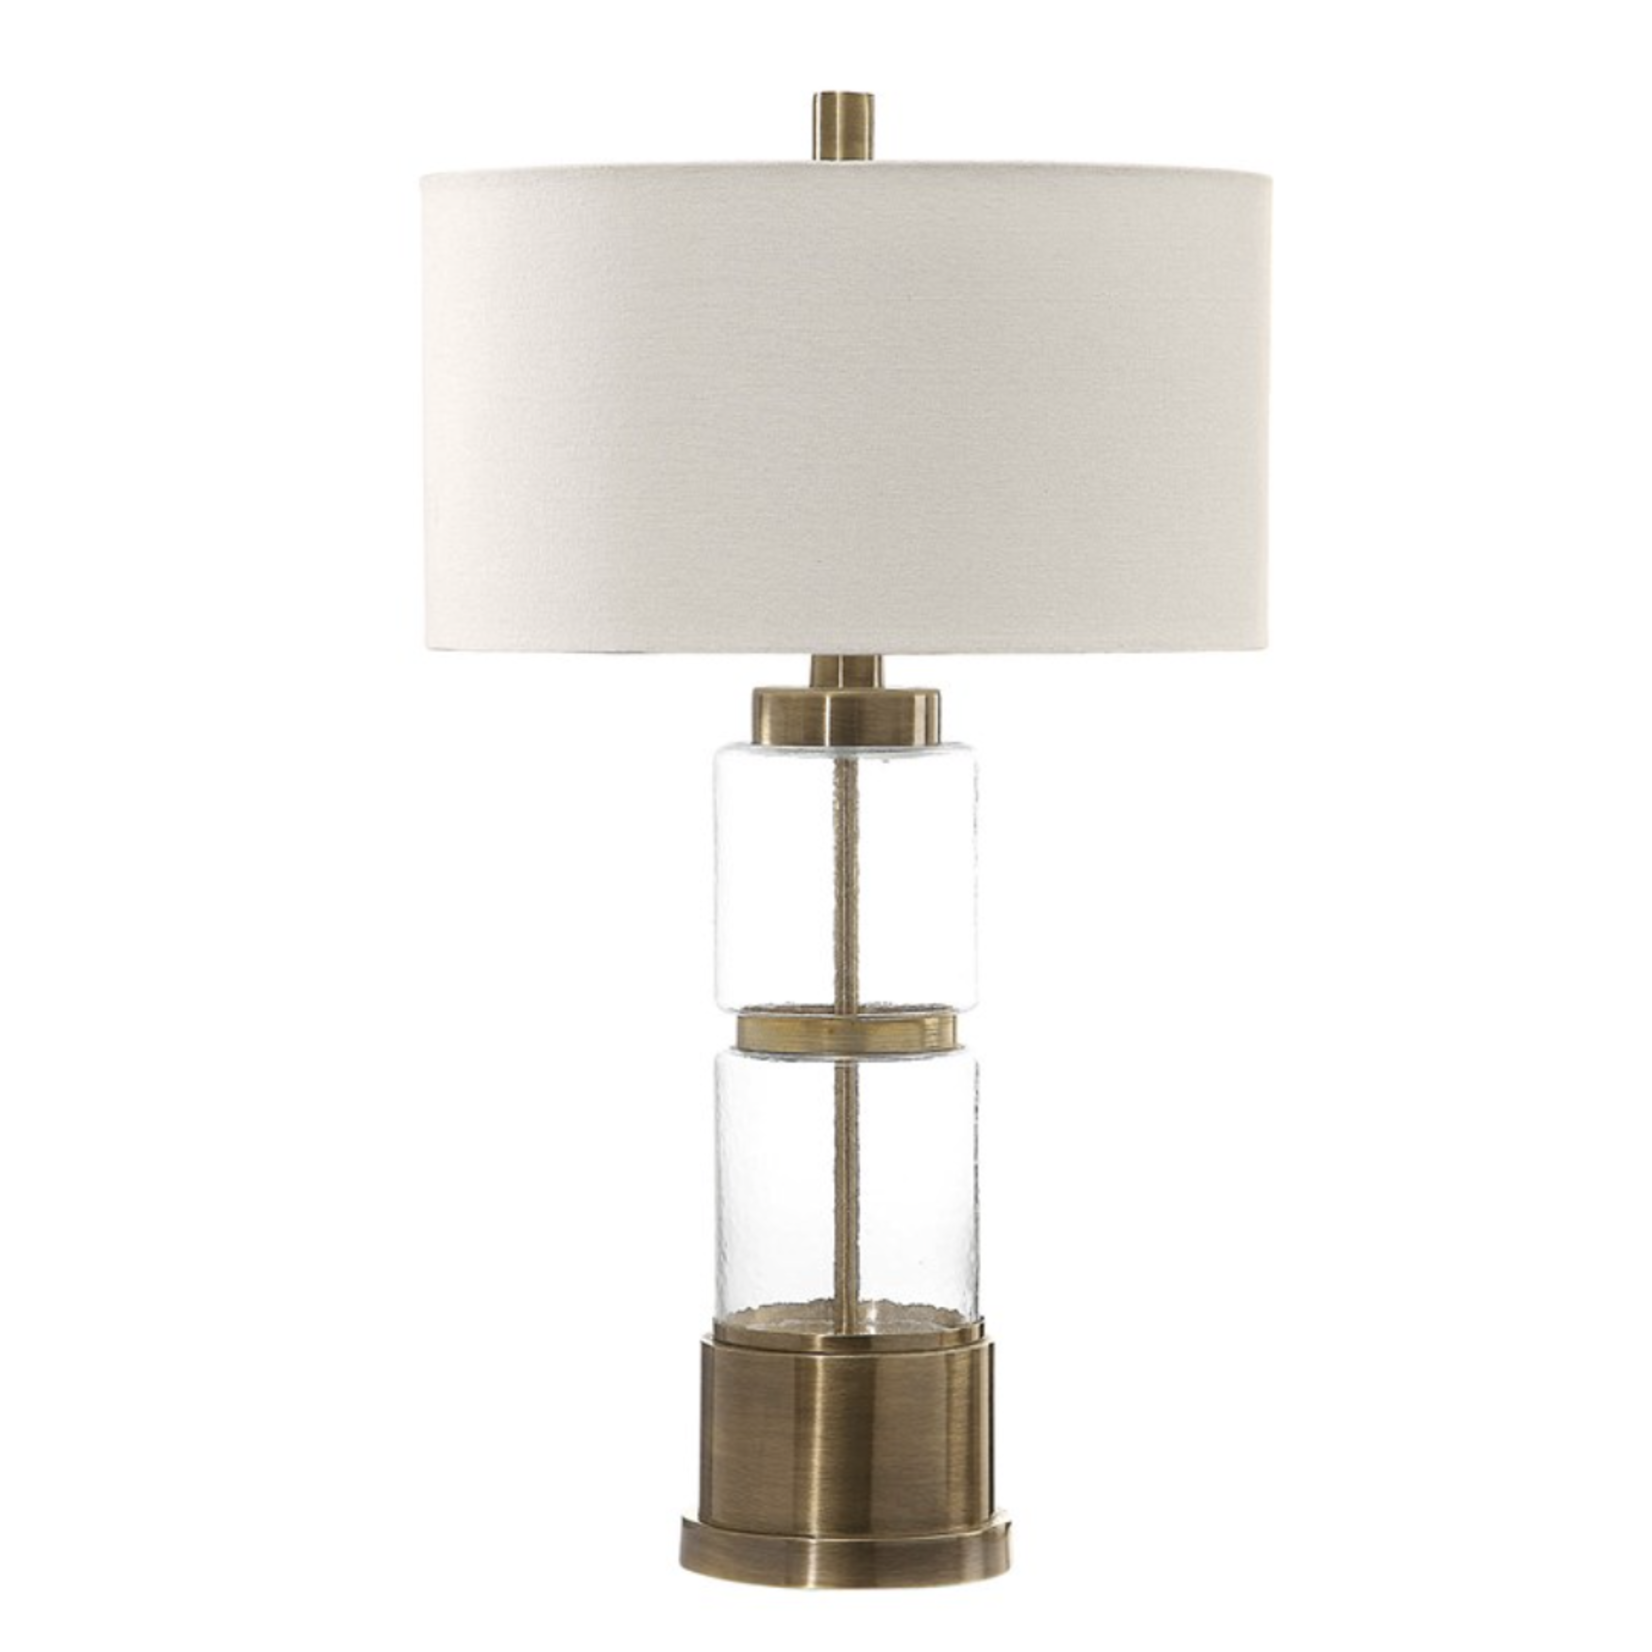 Outside The Box 31" Uttermost Viaga Antique Brass Table Lamp